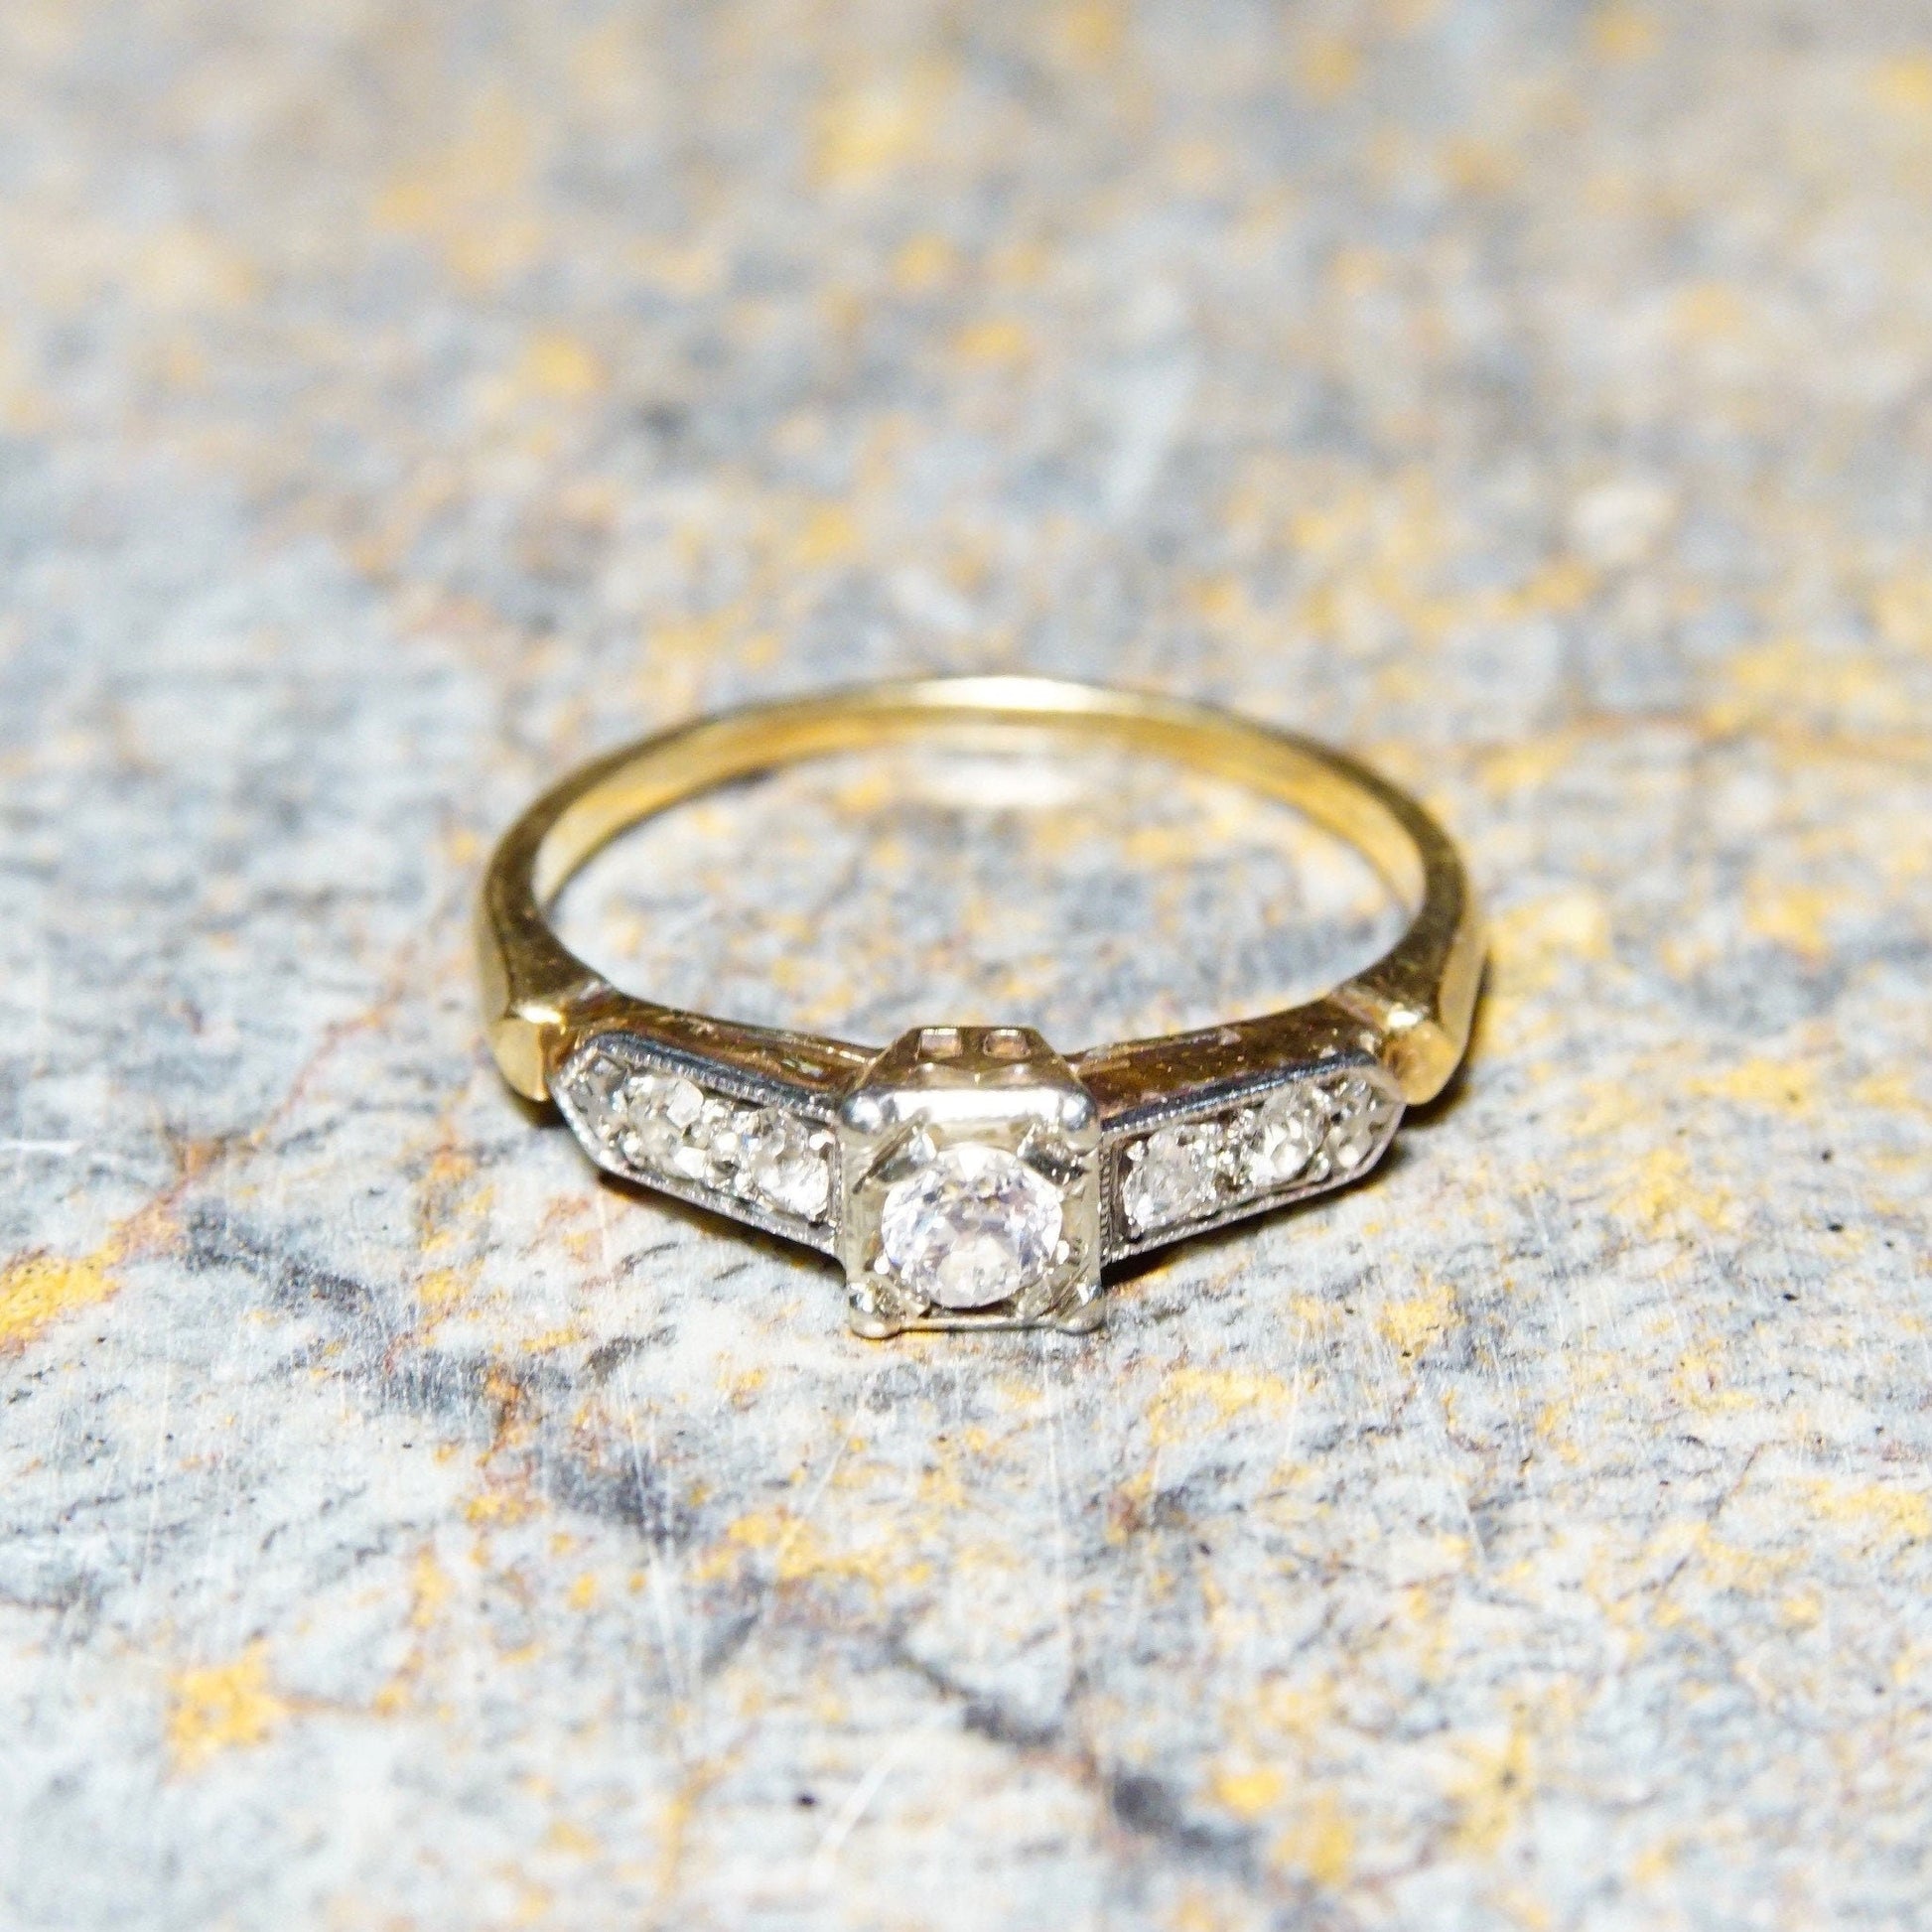 Vintage 14K & 18K gold diamond engagement ring with yellow gold band, white gold settings, and .14 carat old European cut center stone on textured gray background